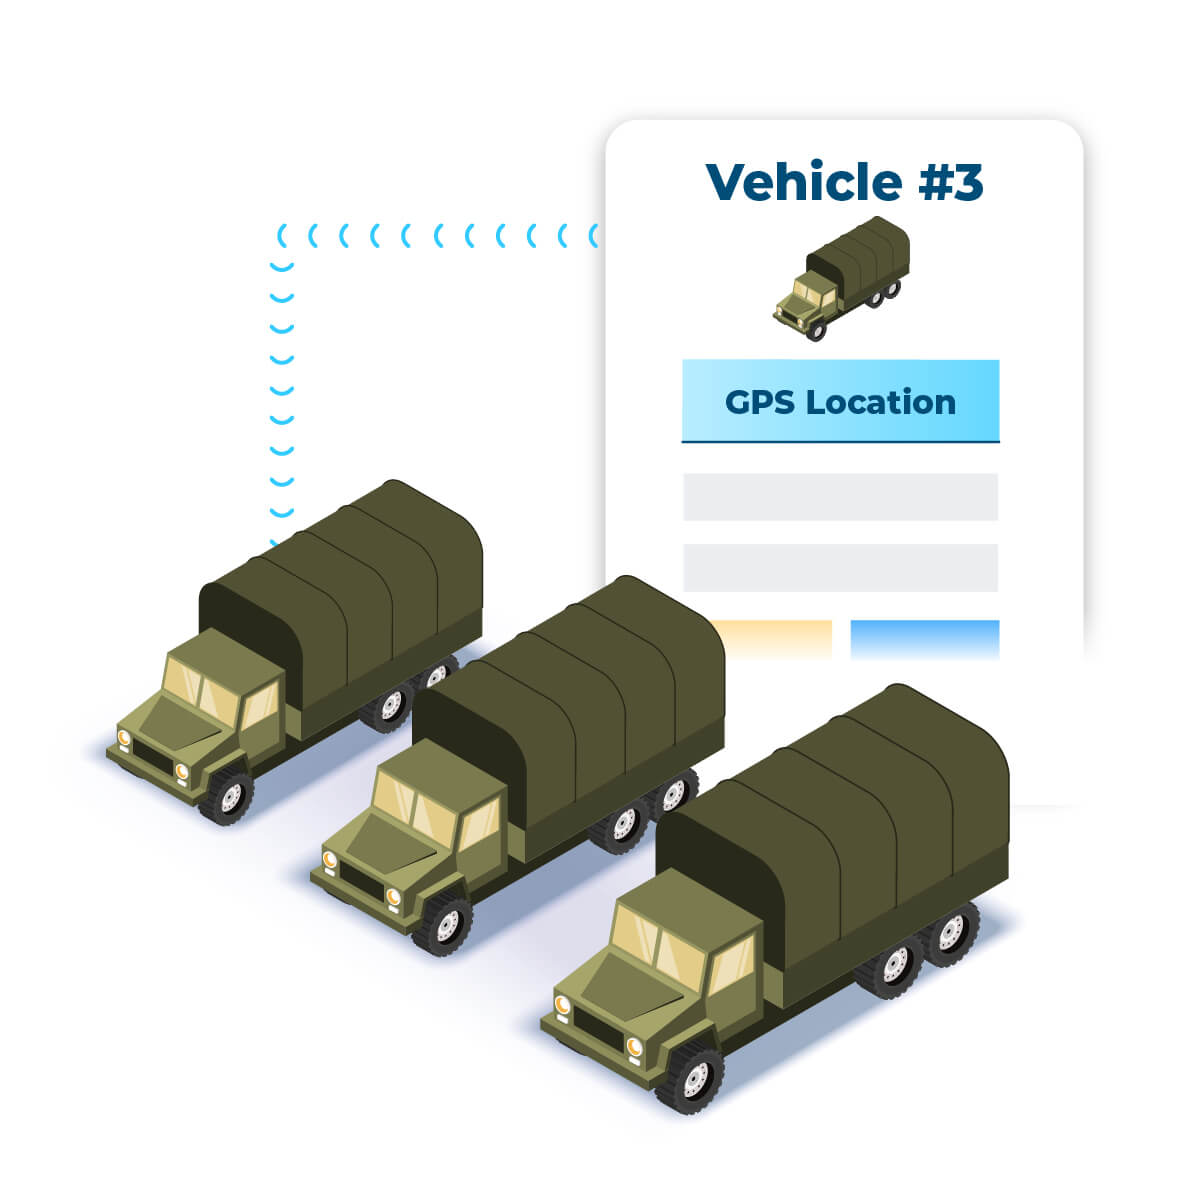 army vehicles in-transit being tracked with GPS asset tracking software